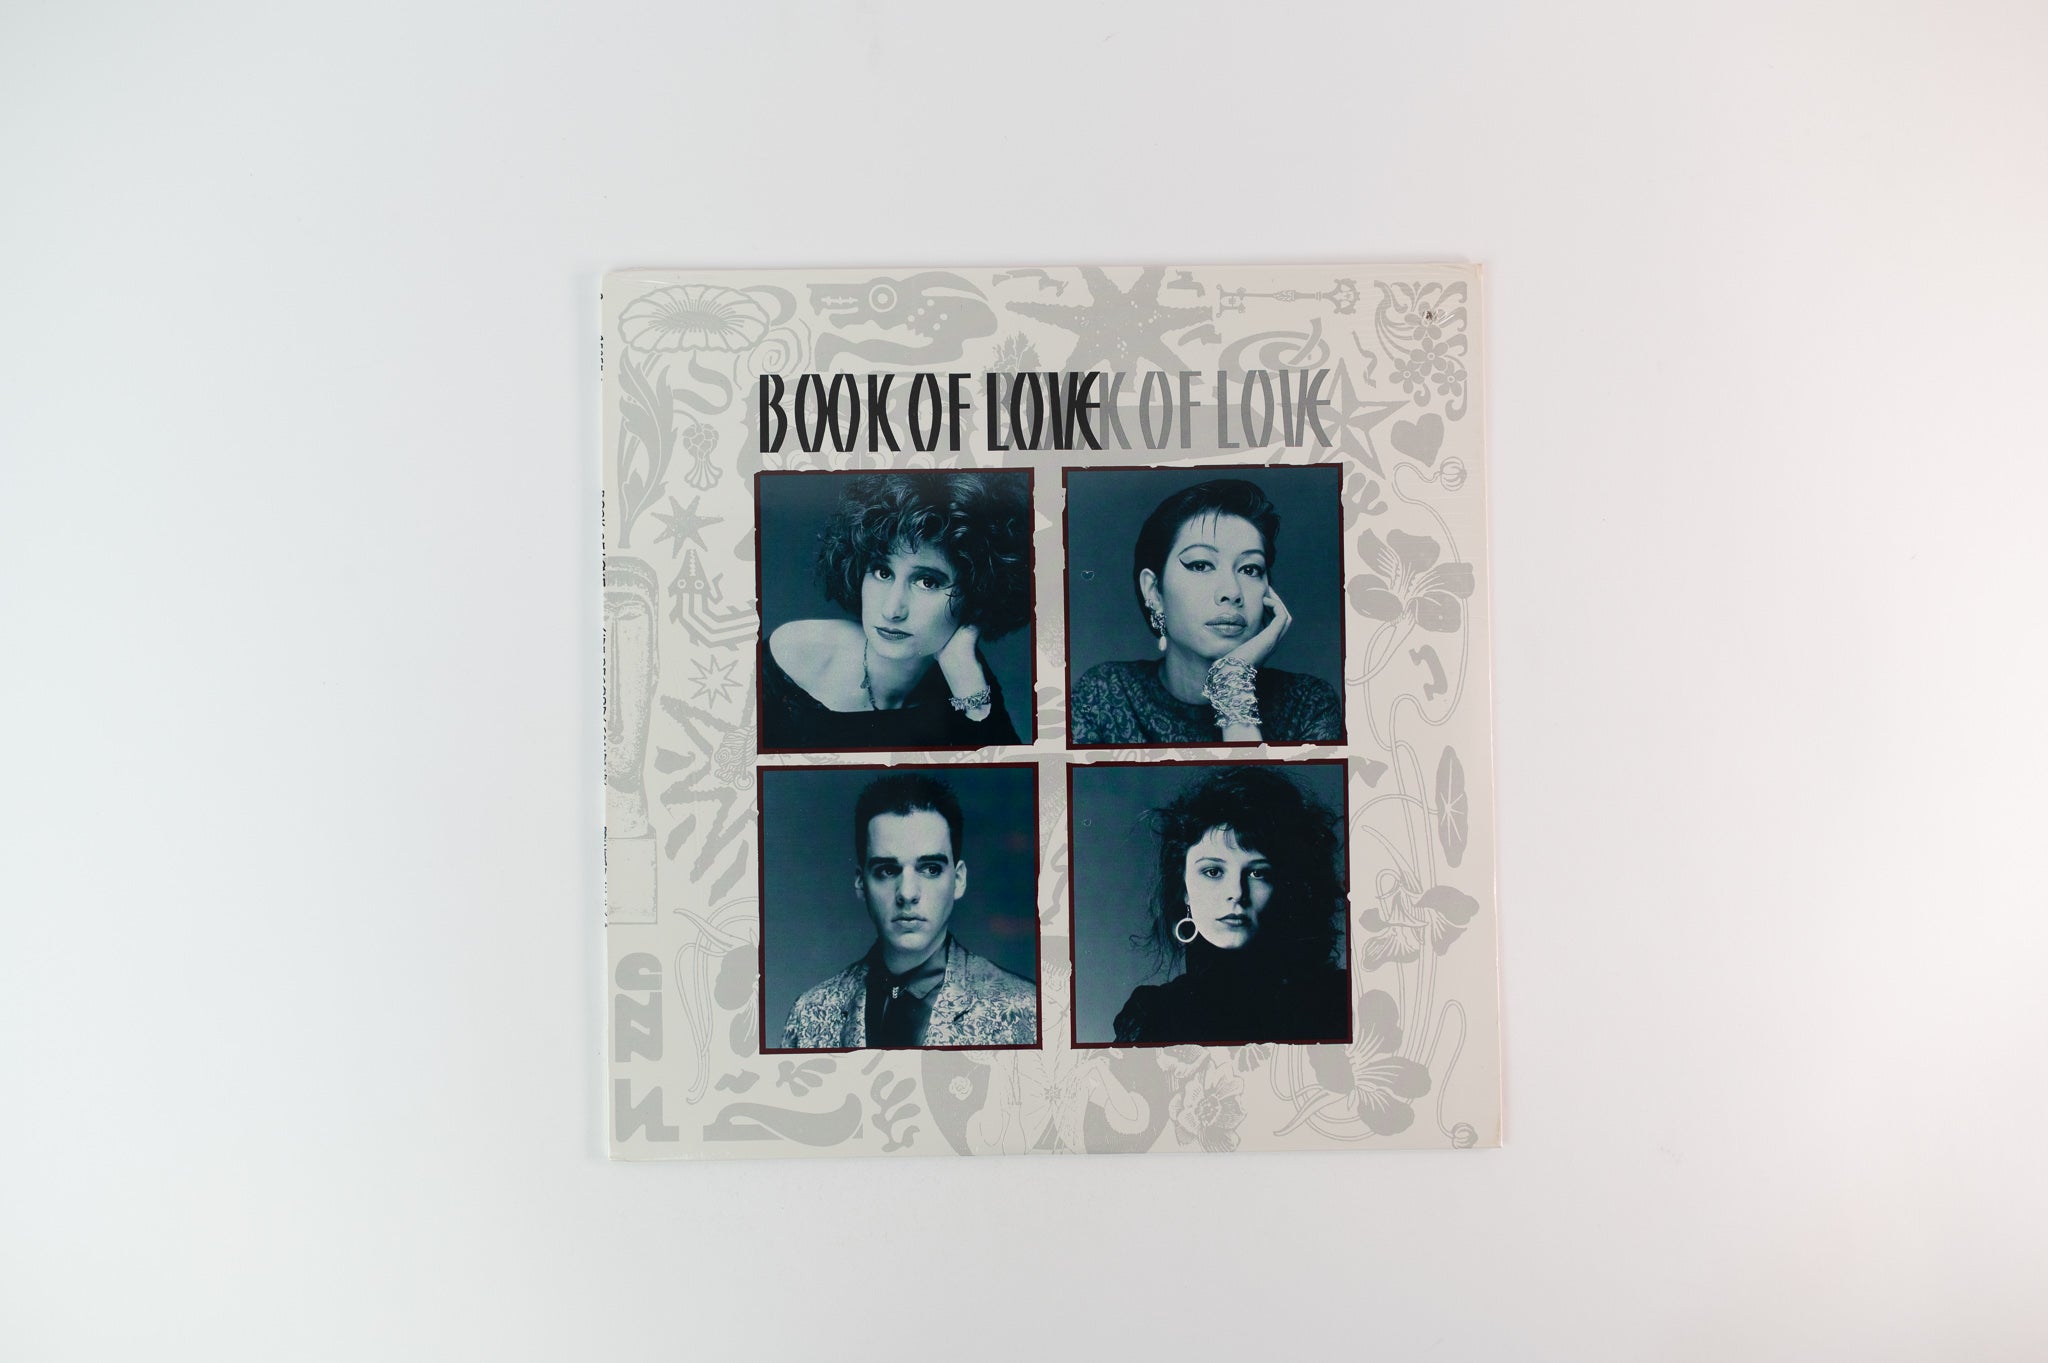 Book Of Love - Book Of Love on Sire - Sealed